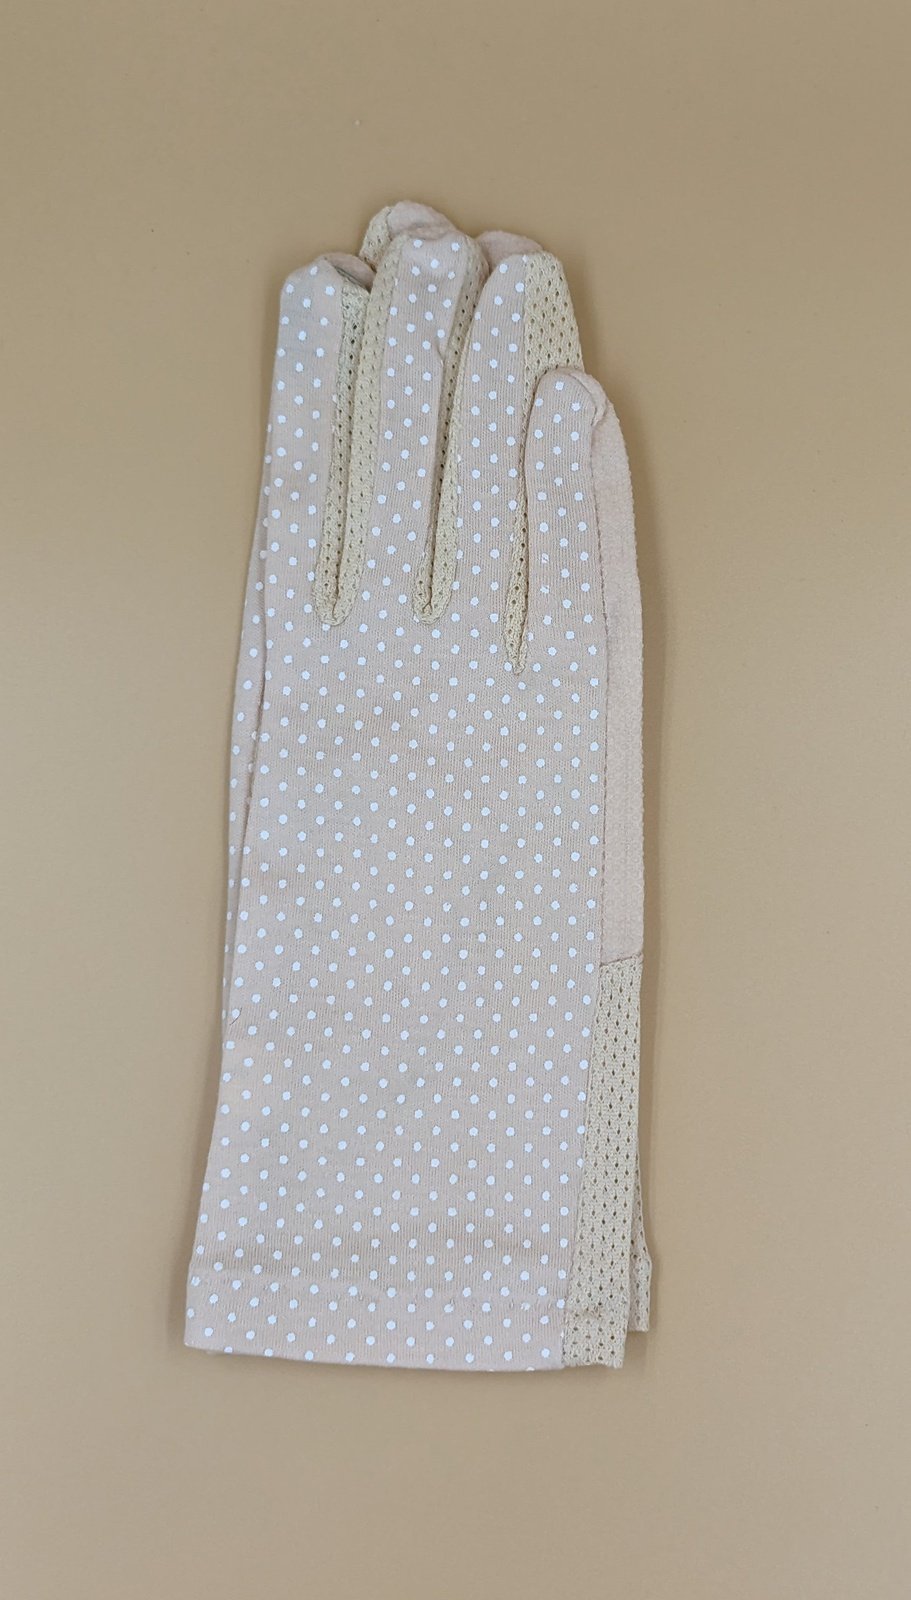 Sun protection Driving Gloves